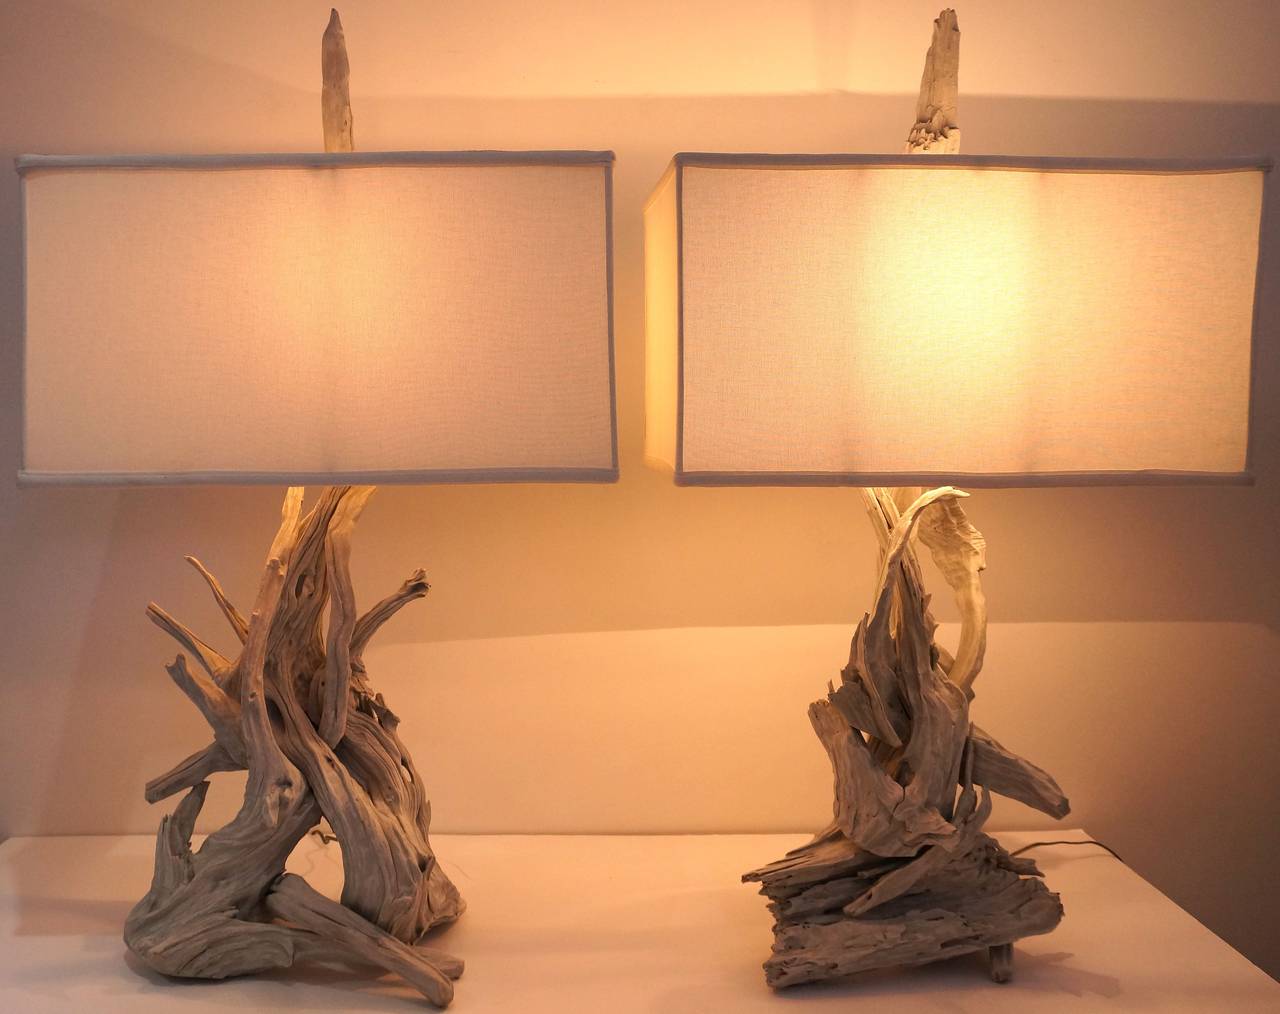 Pair of White-Washed Driftwood Table Lamps, American, 1950s-1960s 1